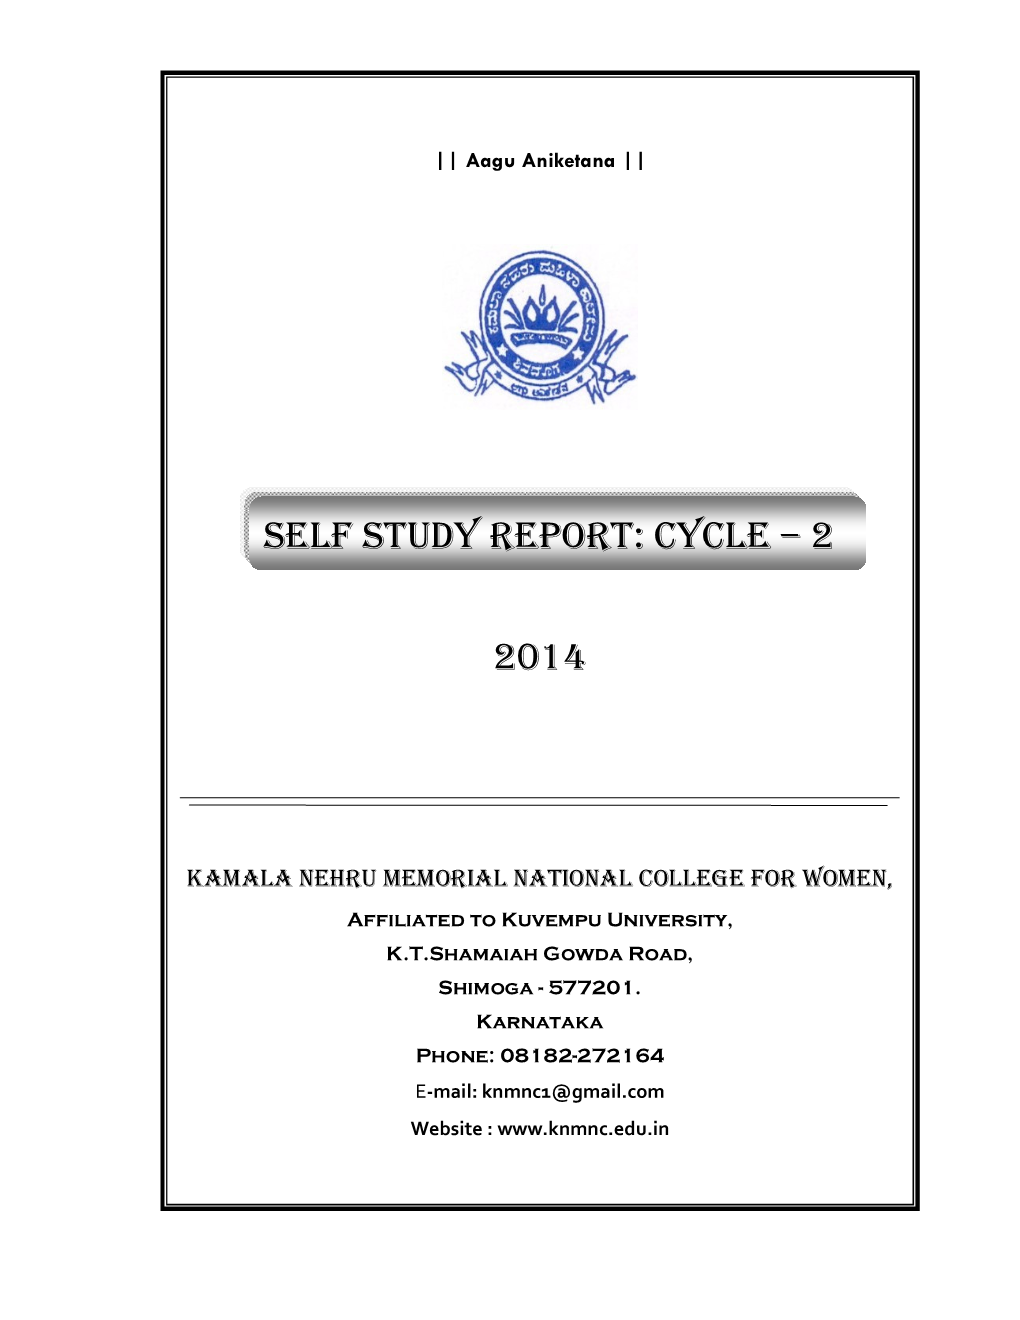 2014 Self Study Report: Cycle